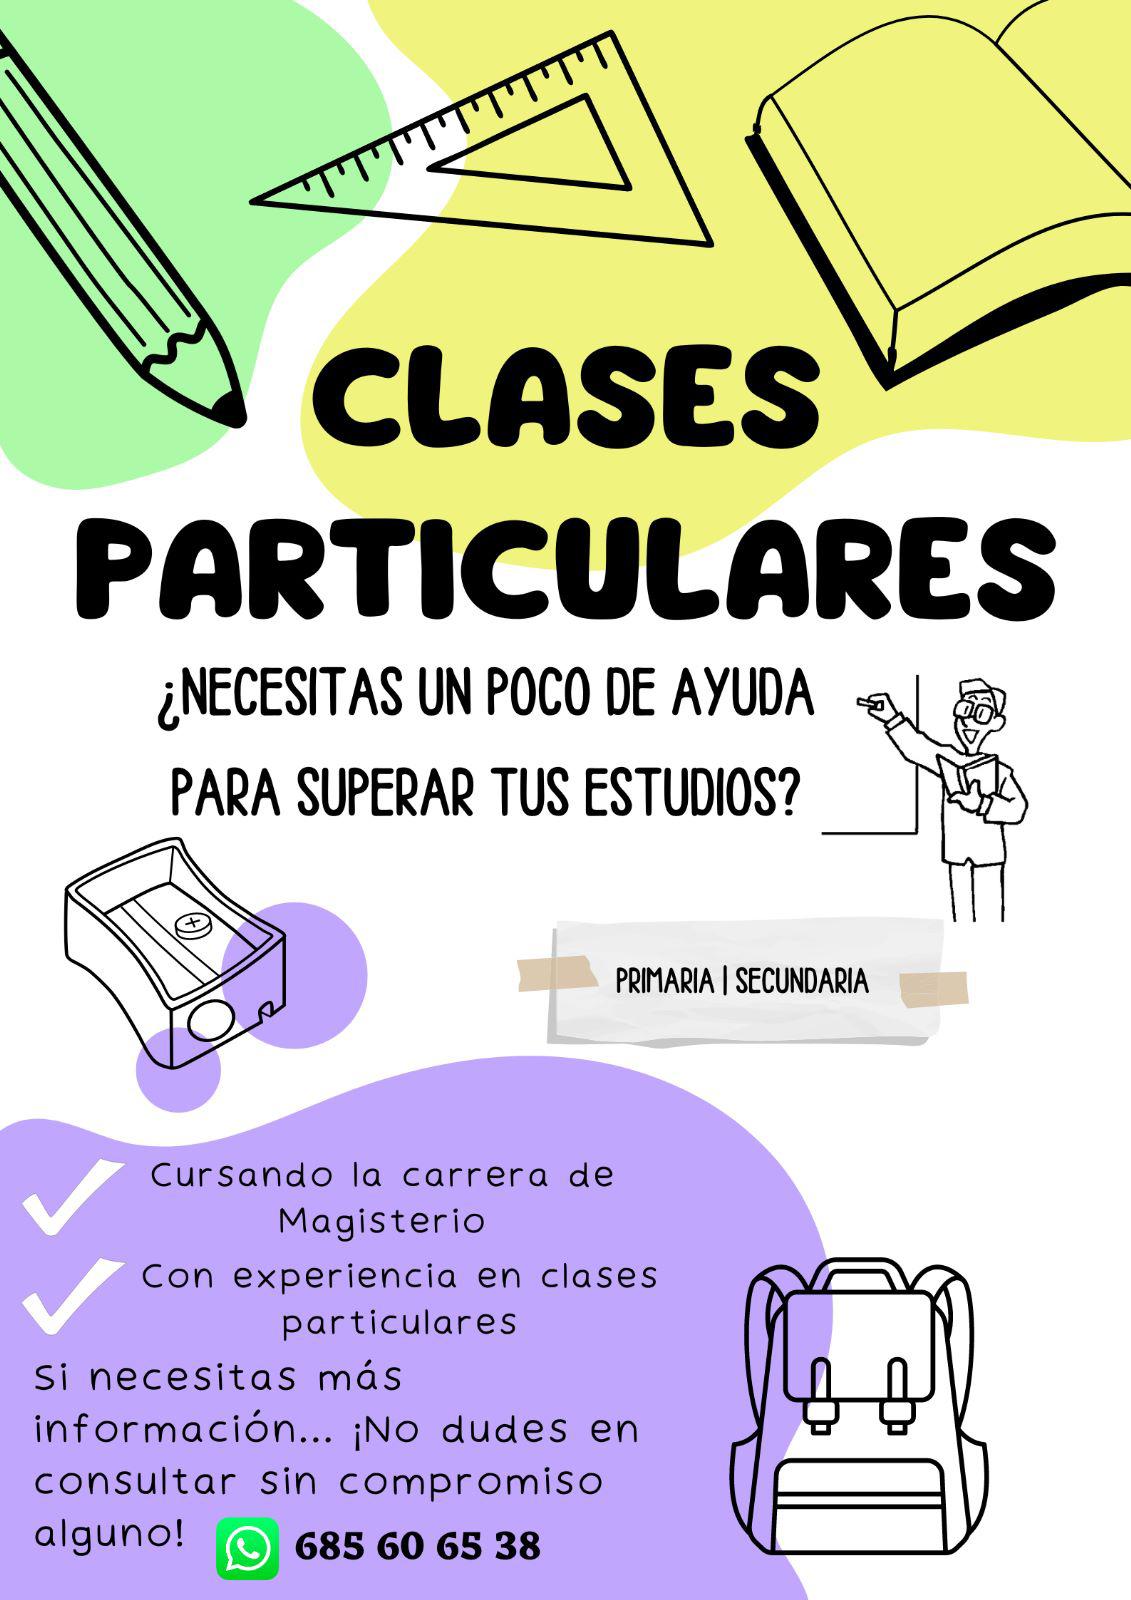 CLASES PARTICULARES